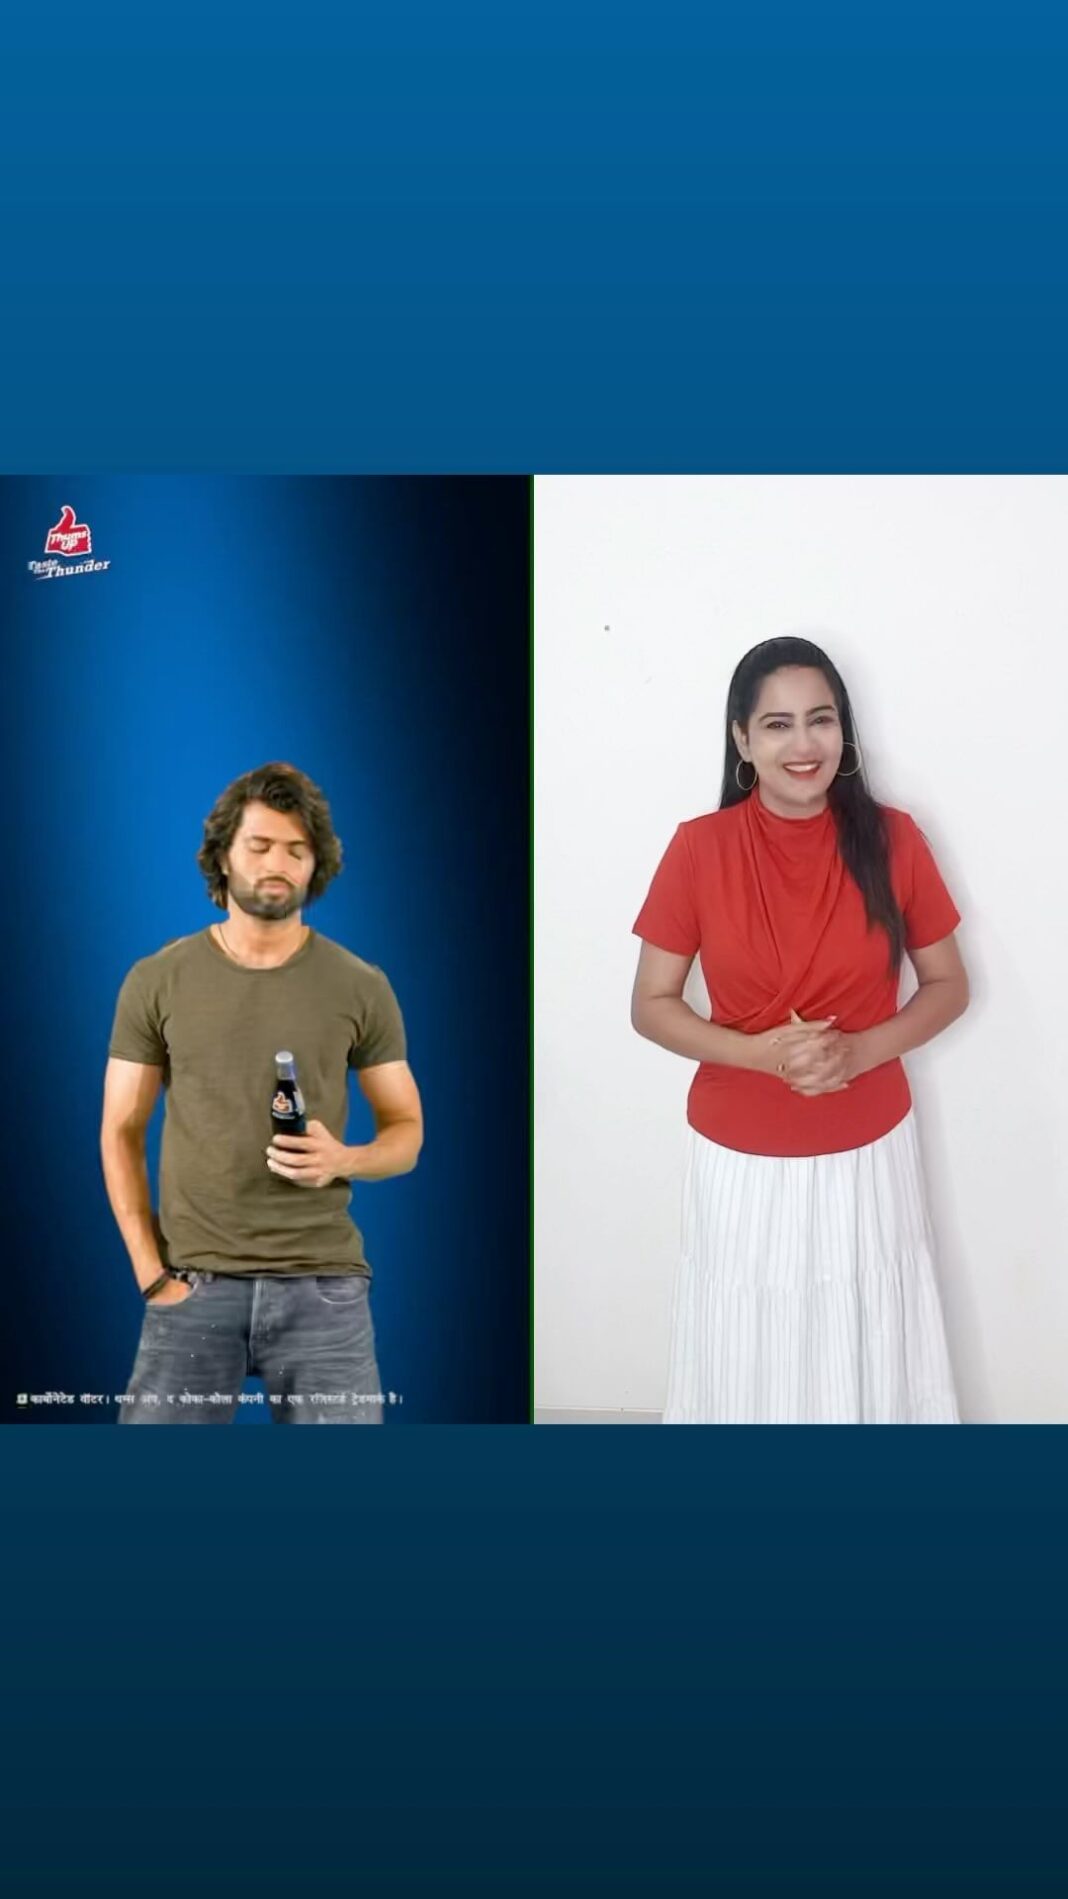 Himaja Instagram - Grab A ThumsUp Bottle from @thedeverakonda Take a Sip, Say Toofan and Get Ready to Bring the Toofan! Share your Remix video to win some awesome merchandise! #ThumsUpStrong #PaidPromotion @thumsupofficial @thedeverakonda